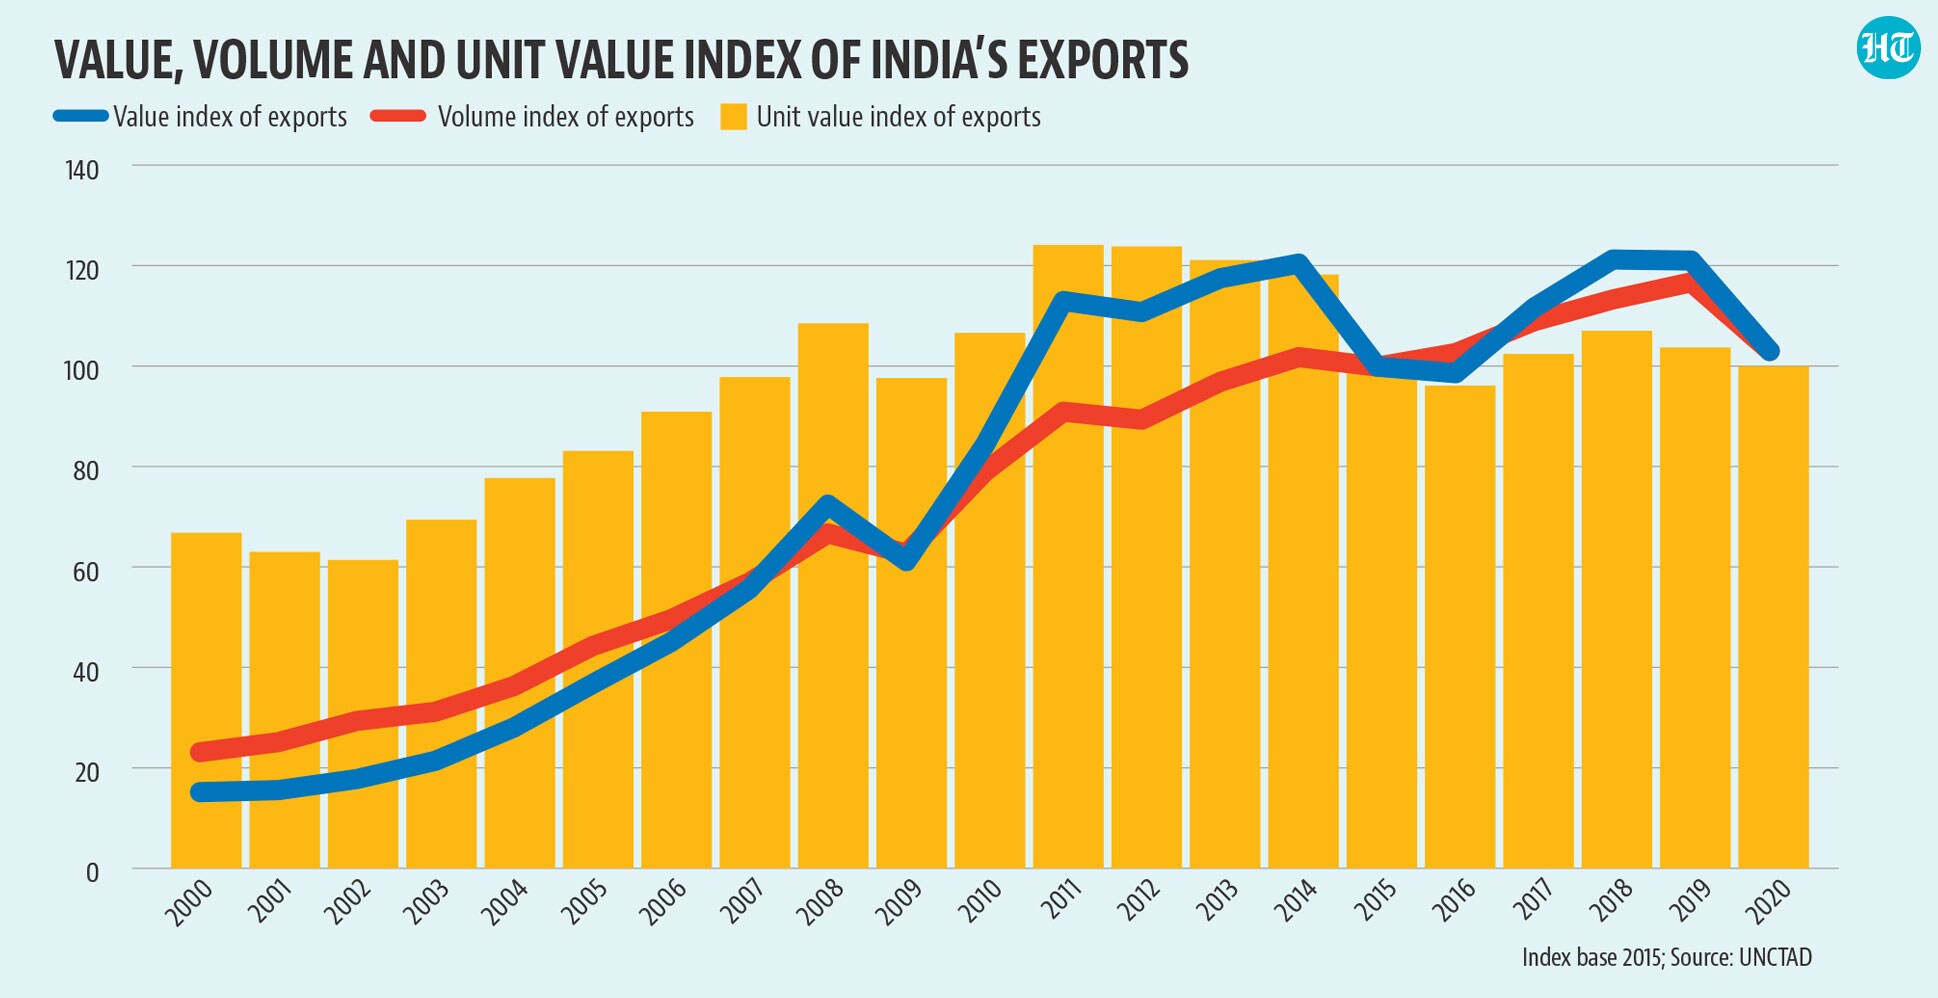 Value, volume and unit value index of India's exports